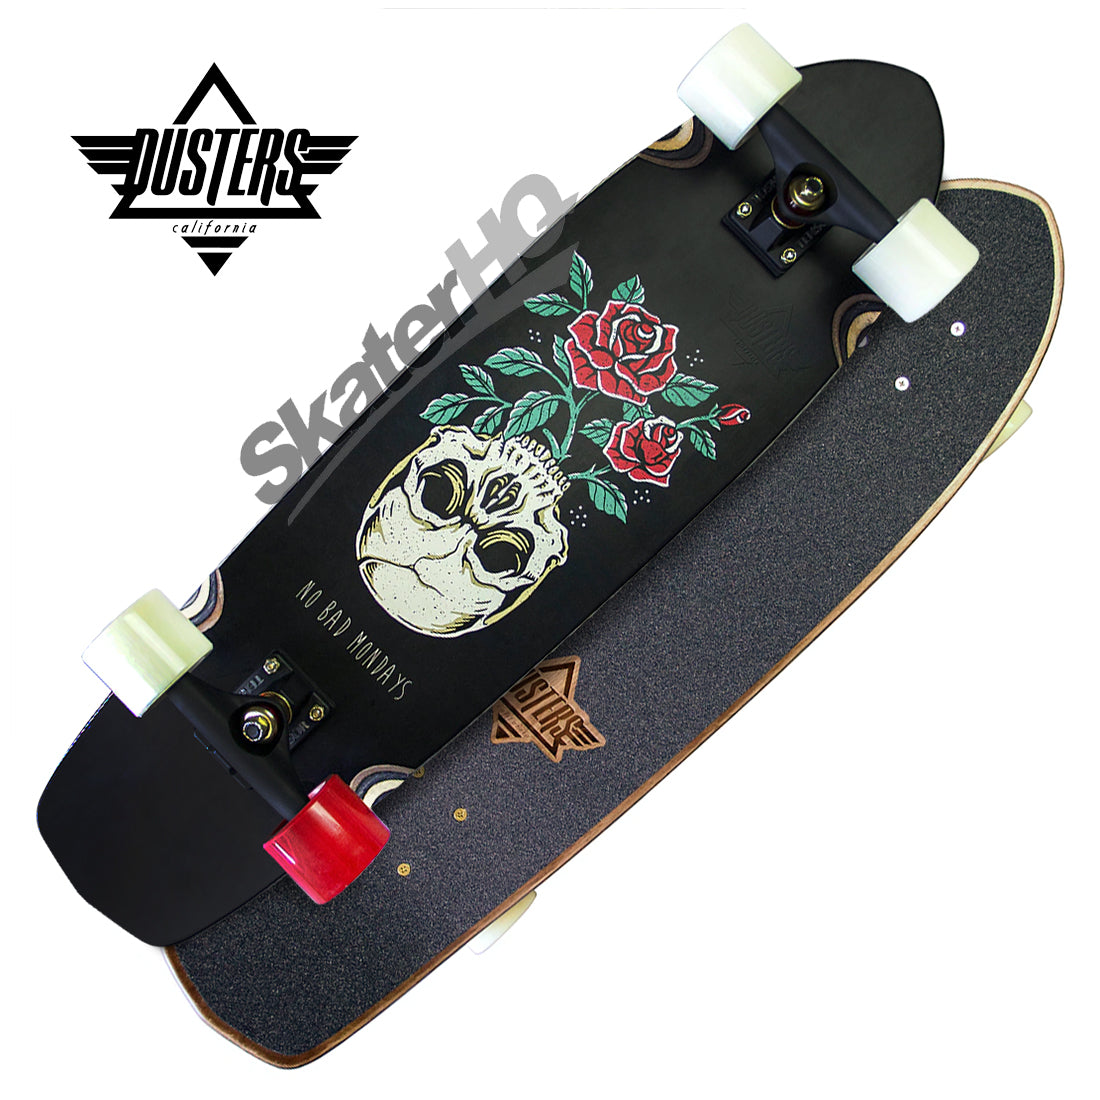 Dusters Mondays Cruiser 31 Complete - Black Skateboard Compl Cruisers